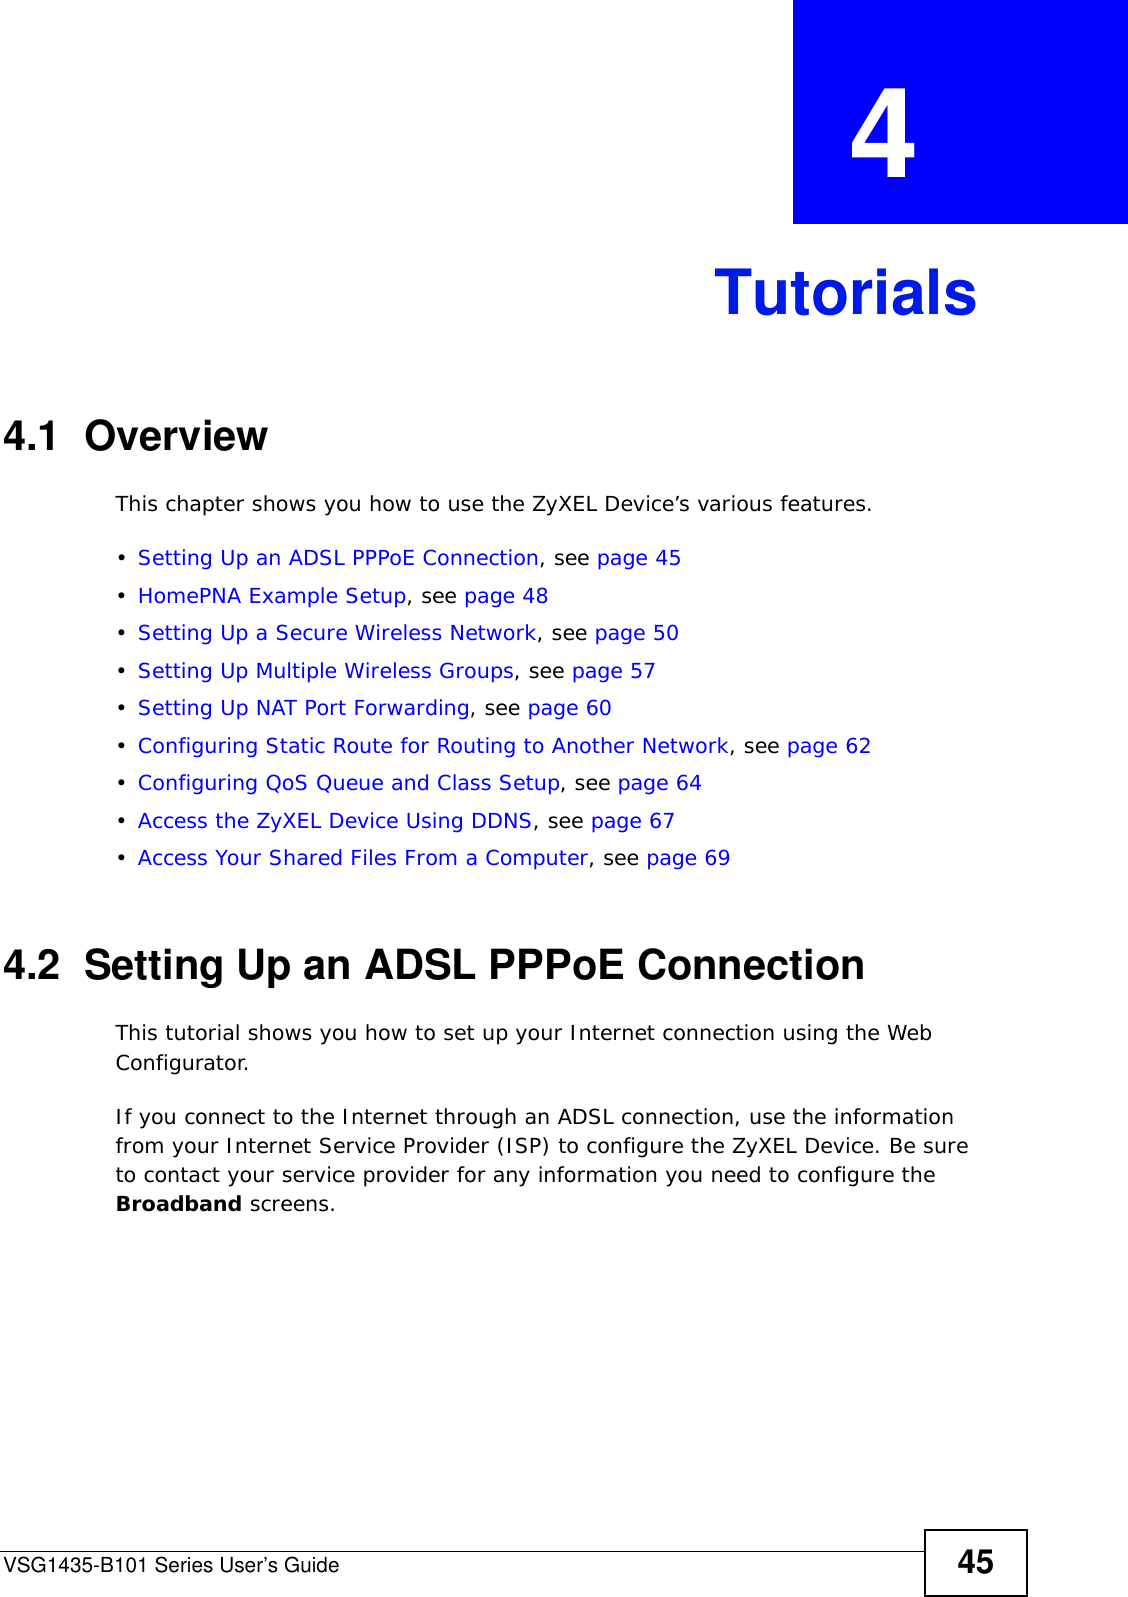 VSG1435-B101 Series User’s Guide 45CHAPTER  4 Tutorials4.1  OverviewThis chapter shows you how to use the ZyXEL Device’s various features.•Setting Up an ADSL PPPoE Connection, see page 45•HomePNA Example Setup, see page 48•Setting Up a Secure Wireless Network, see page 50•Setting Up Multiple Wireless Groups, see page 57•Setting Up NAT Port Forwarding, see page 60•Configuring Static Route for Routing to Another Network, see page 62•Configuring QoS Queue and Class Setup, see page 64•Access the ZyXEL Device Using DDNS, see page 67•Access Your Shared Files From a Computer, see page 694.2  Setting Up an ADSL PPPoE ConnectionThis tutorial shows you how to set up your Internet connection using the Web Configurator. If you connect to the Internet through an ADSL connection, use the information from your Internet Service Provider (ISP) to configure the ZyXEL Device. Be sure to contact your service provider for any information you need to configure the Broadband screens. 